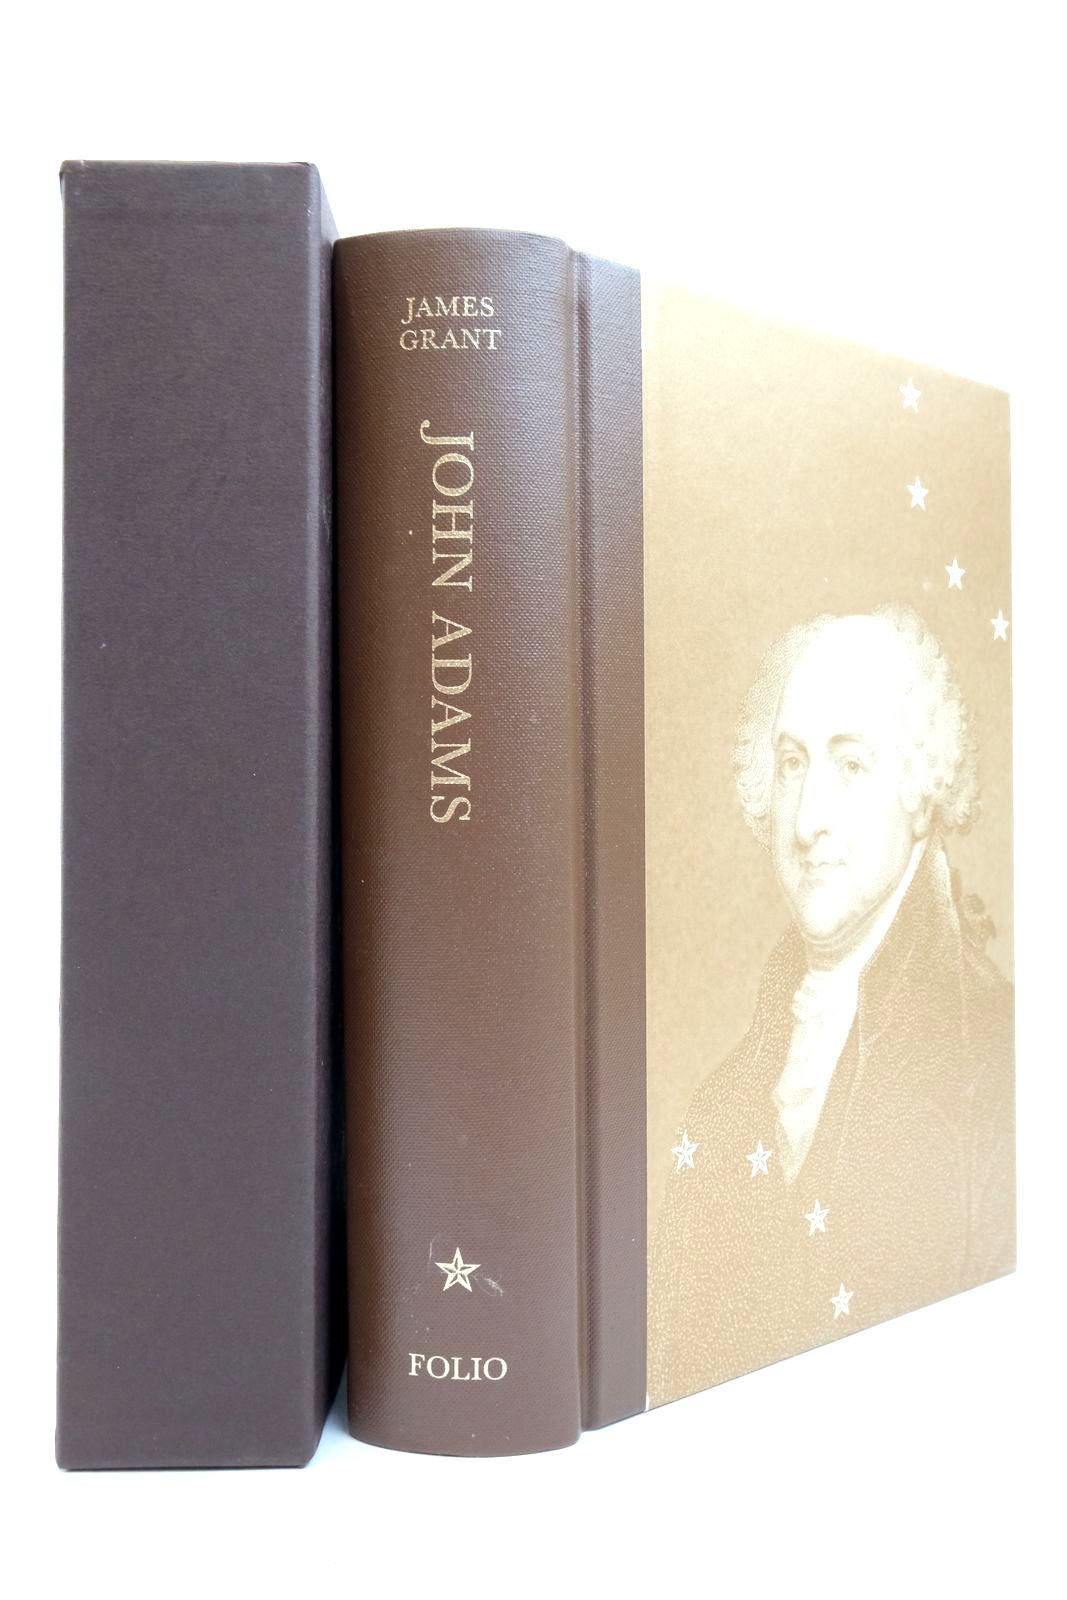 Photo of JOHN ADAMS: PARTY OF ONE written by Grant, James published by Folio Society (STOCK CODE: 2137832)  for sale by Stella & Rose's Books